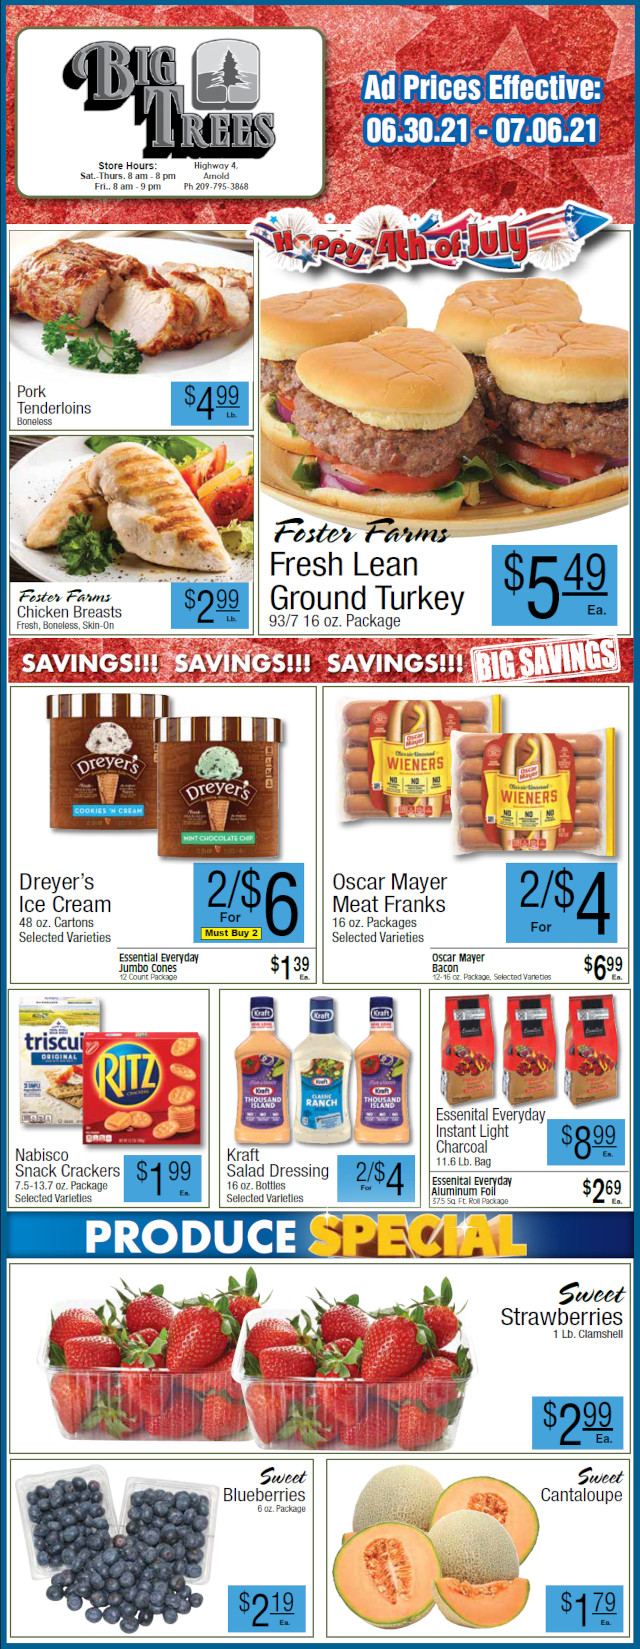 Big Trees Market Weekly Ad & Grocery Specials Through July 6th! Shop Local & Save!!